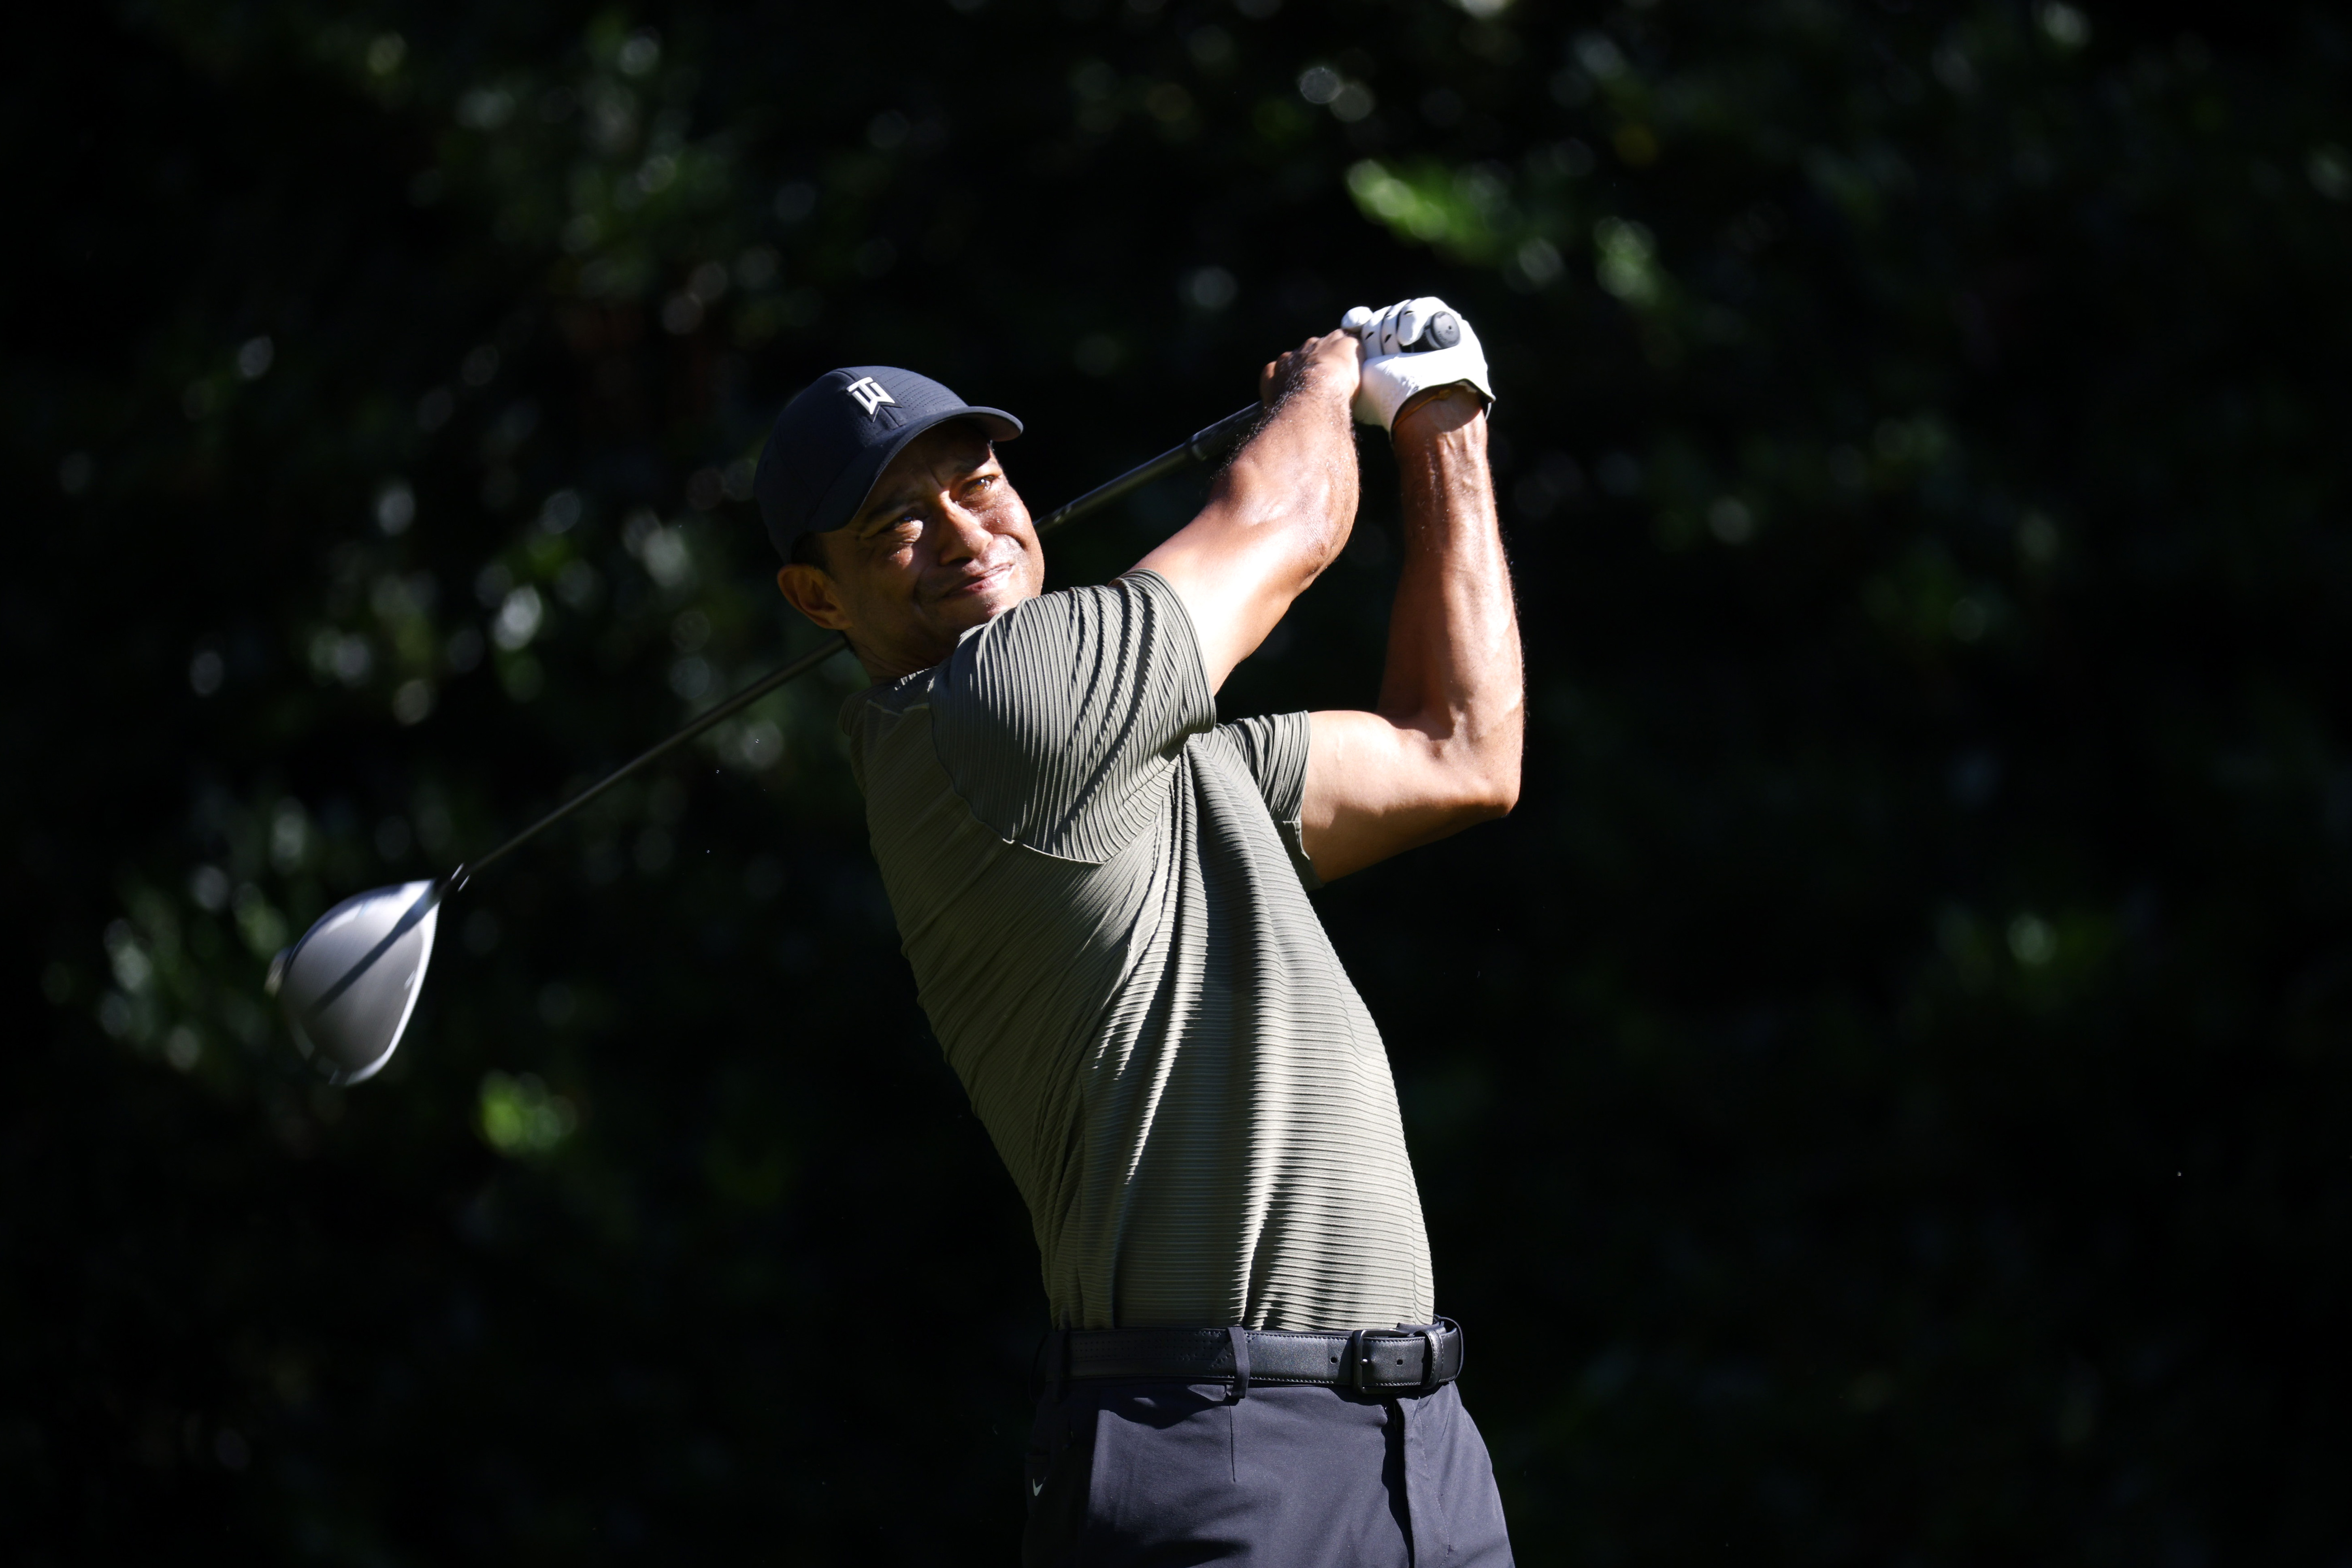 Golf - The Masters - Augusta National Golf Club - Augusta, Georgia, U.S. - November 12, 2020 Tiger Woods of the U.S. in action during the first round REUTERS/Brian Snyder